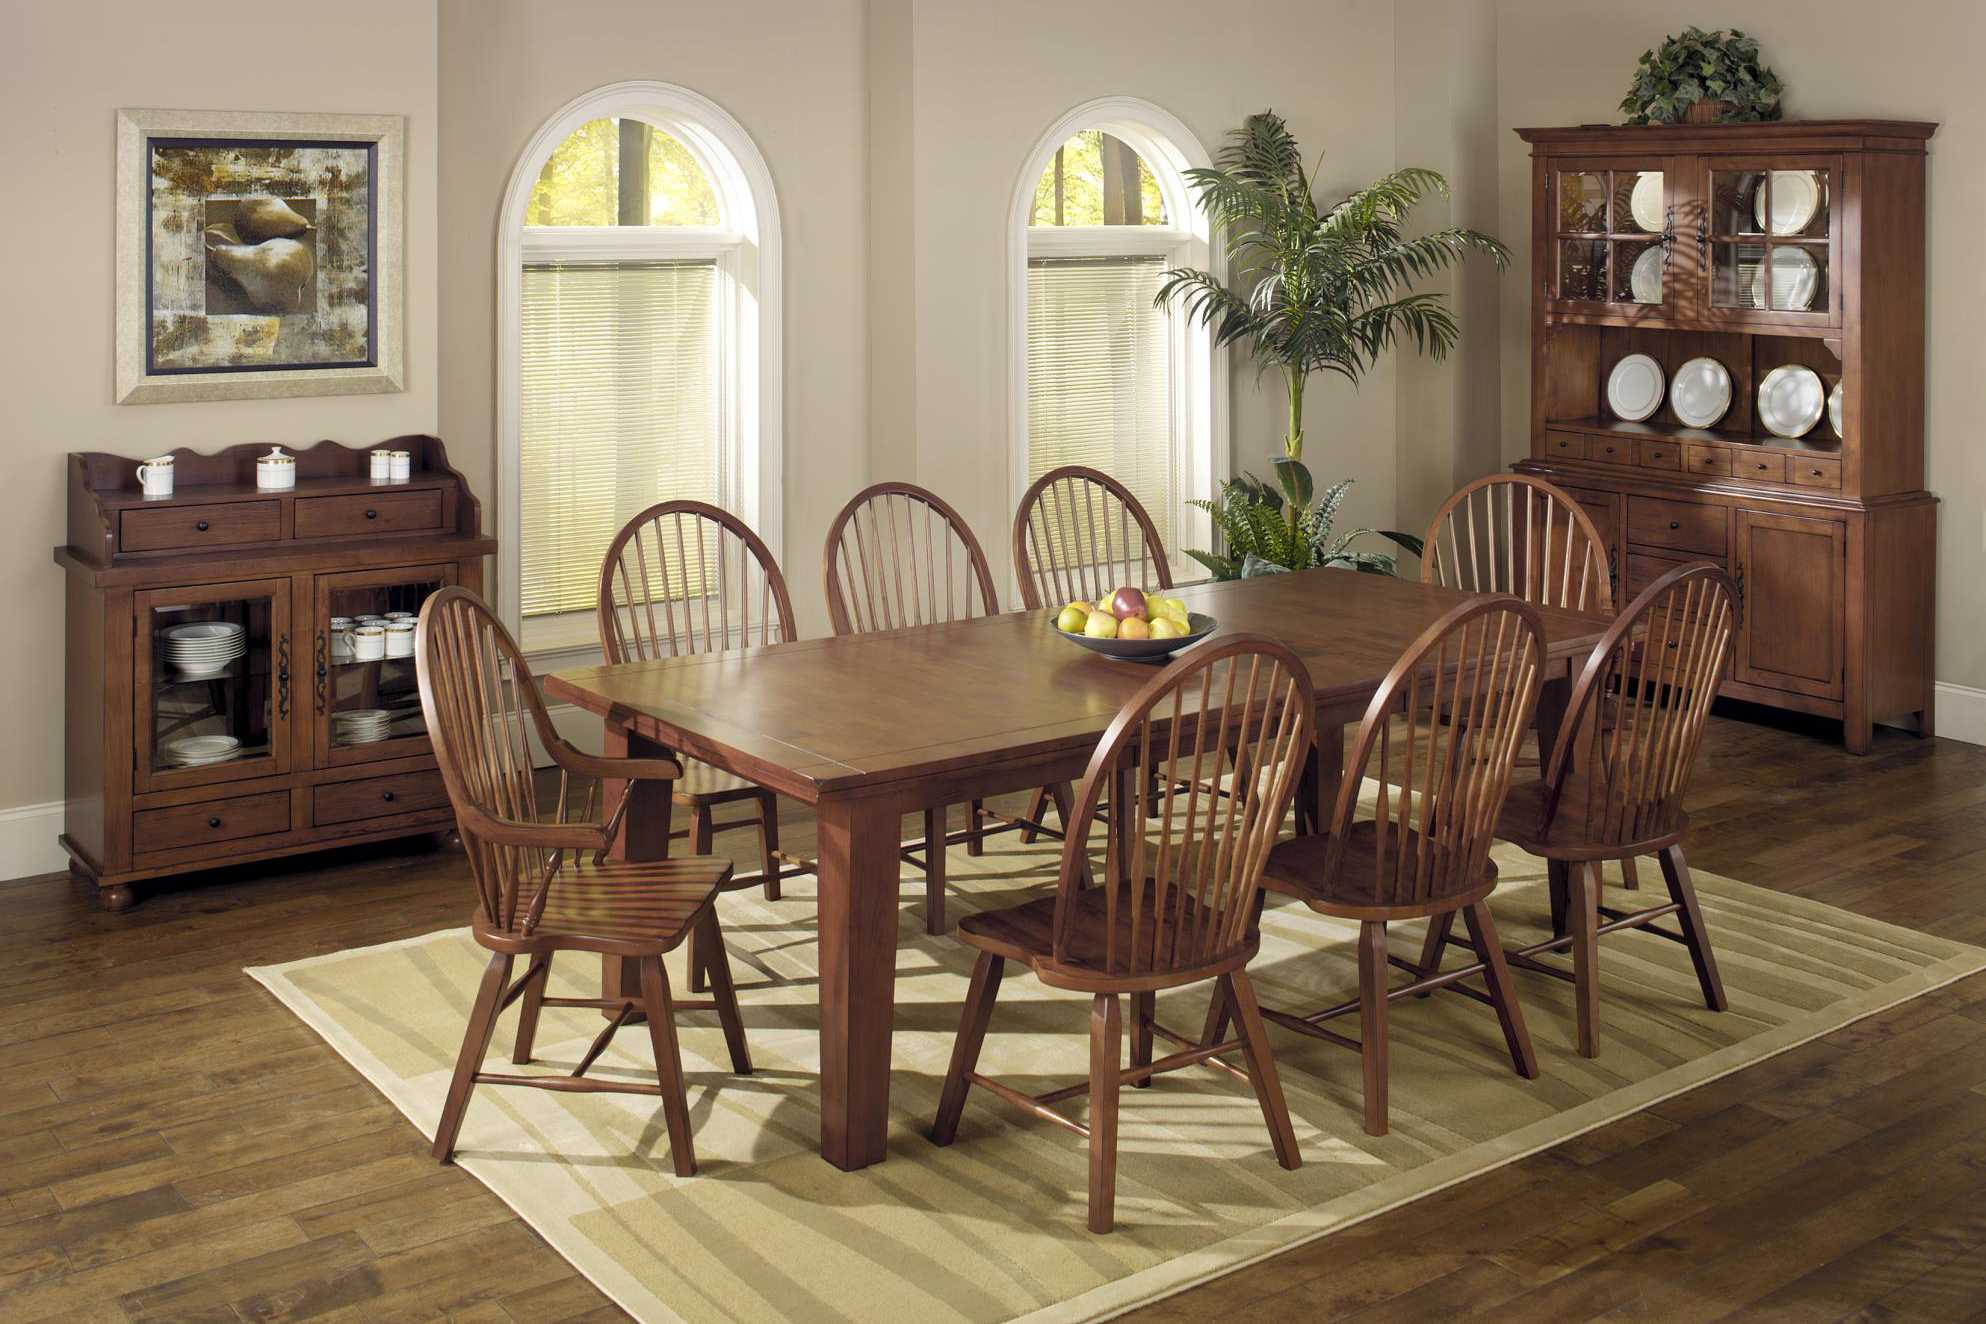 44" X 96" X 30" Tobacco Hardwood Extendable Dining Table with Leaf